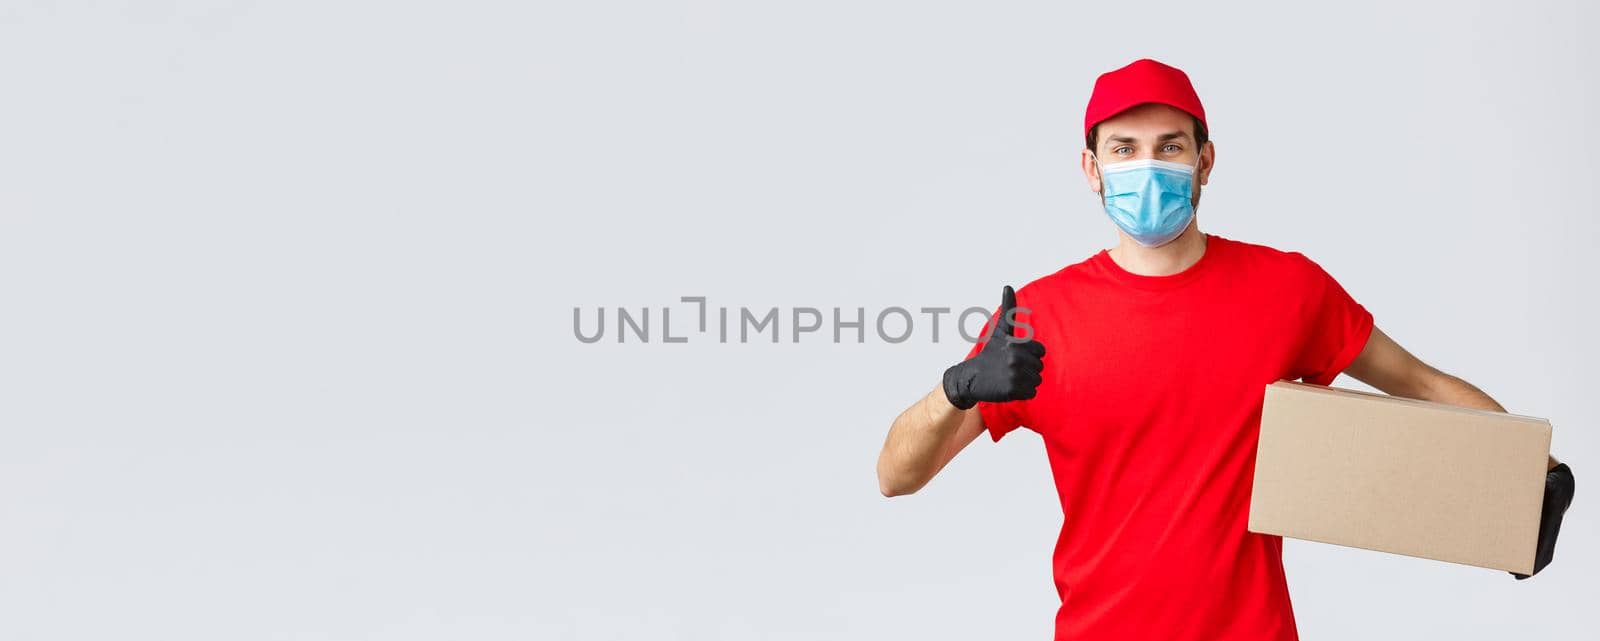 Packages and parcels delivery, covid-19 quarantine delivery, transfer orders. Cheerful courier in red uniform, gloves and face mask, thumb-up, recommend contactless deliver, holding box with order.